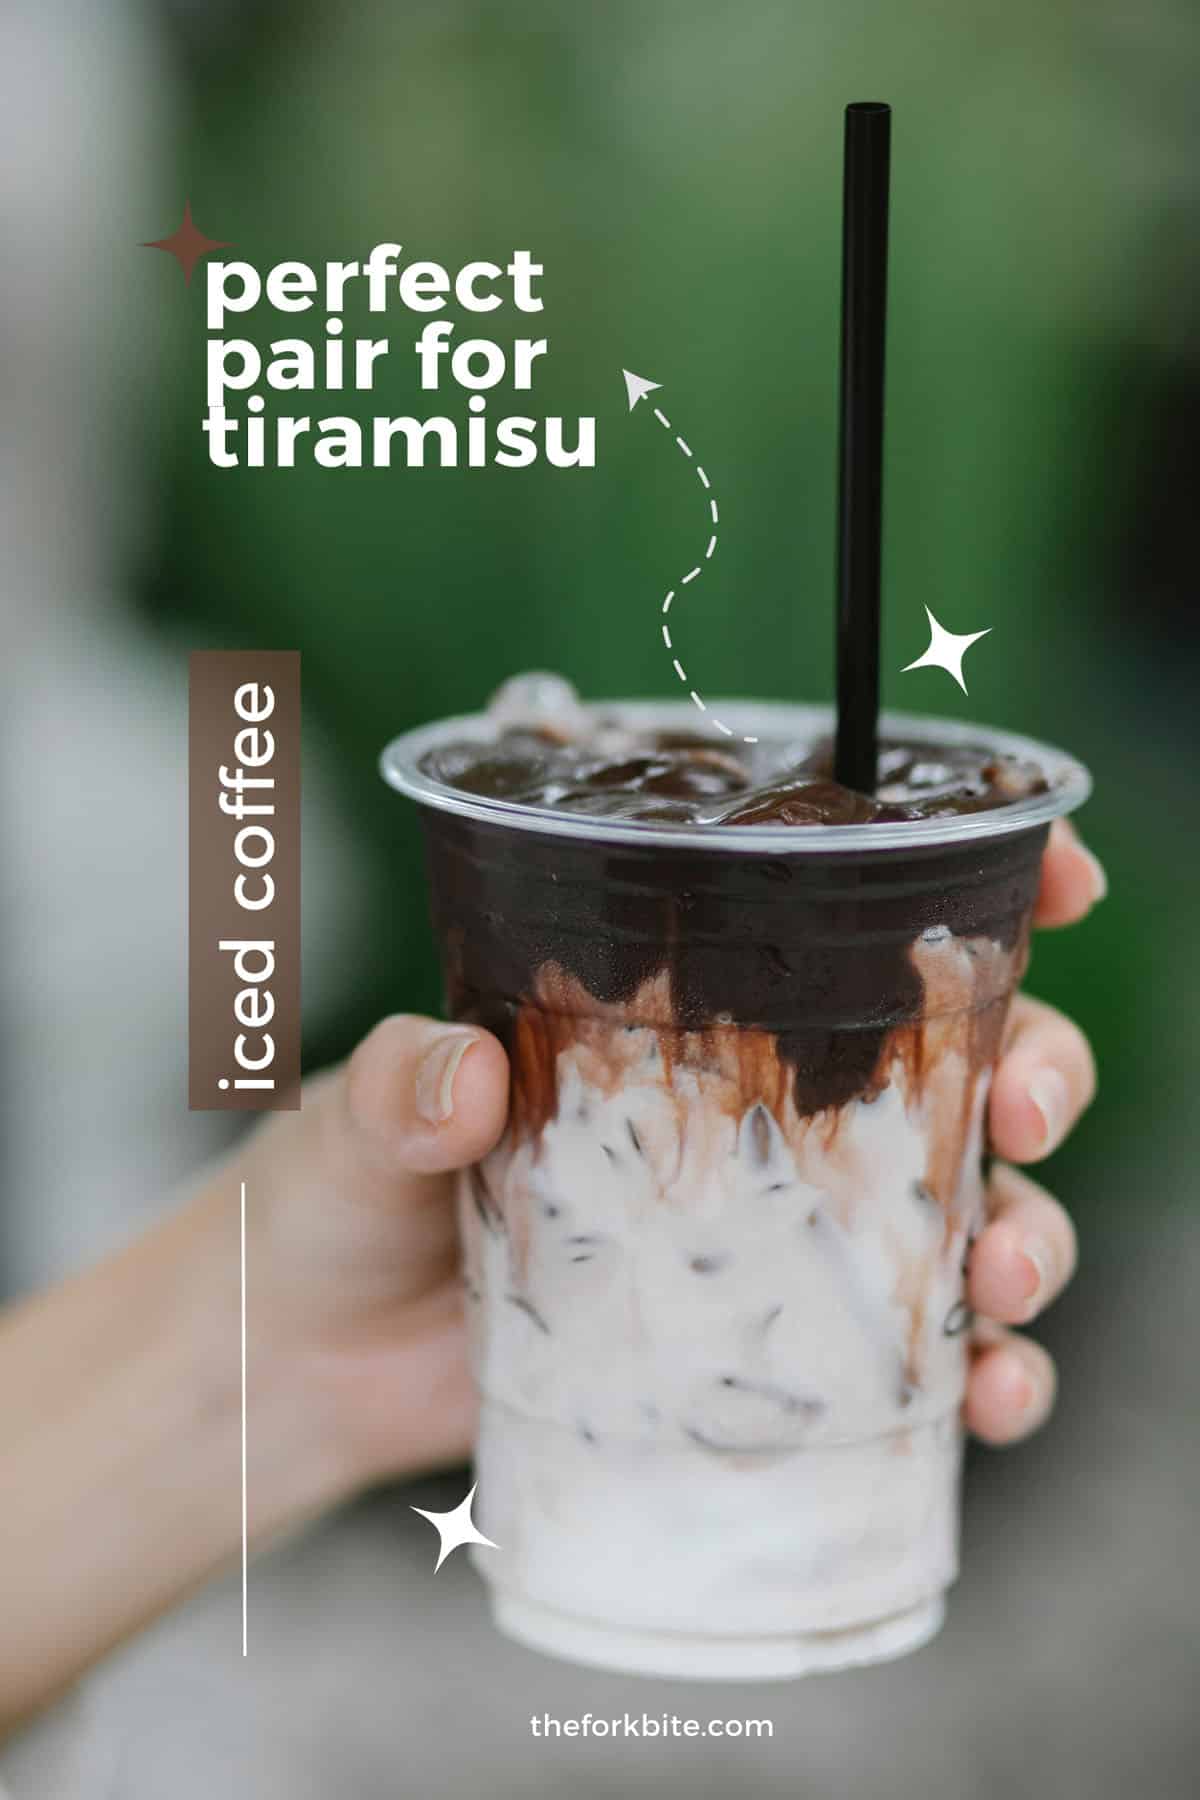 Iced coffee is a good non-alcoholic drink paired with Tiramisu